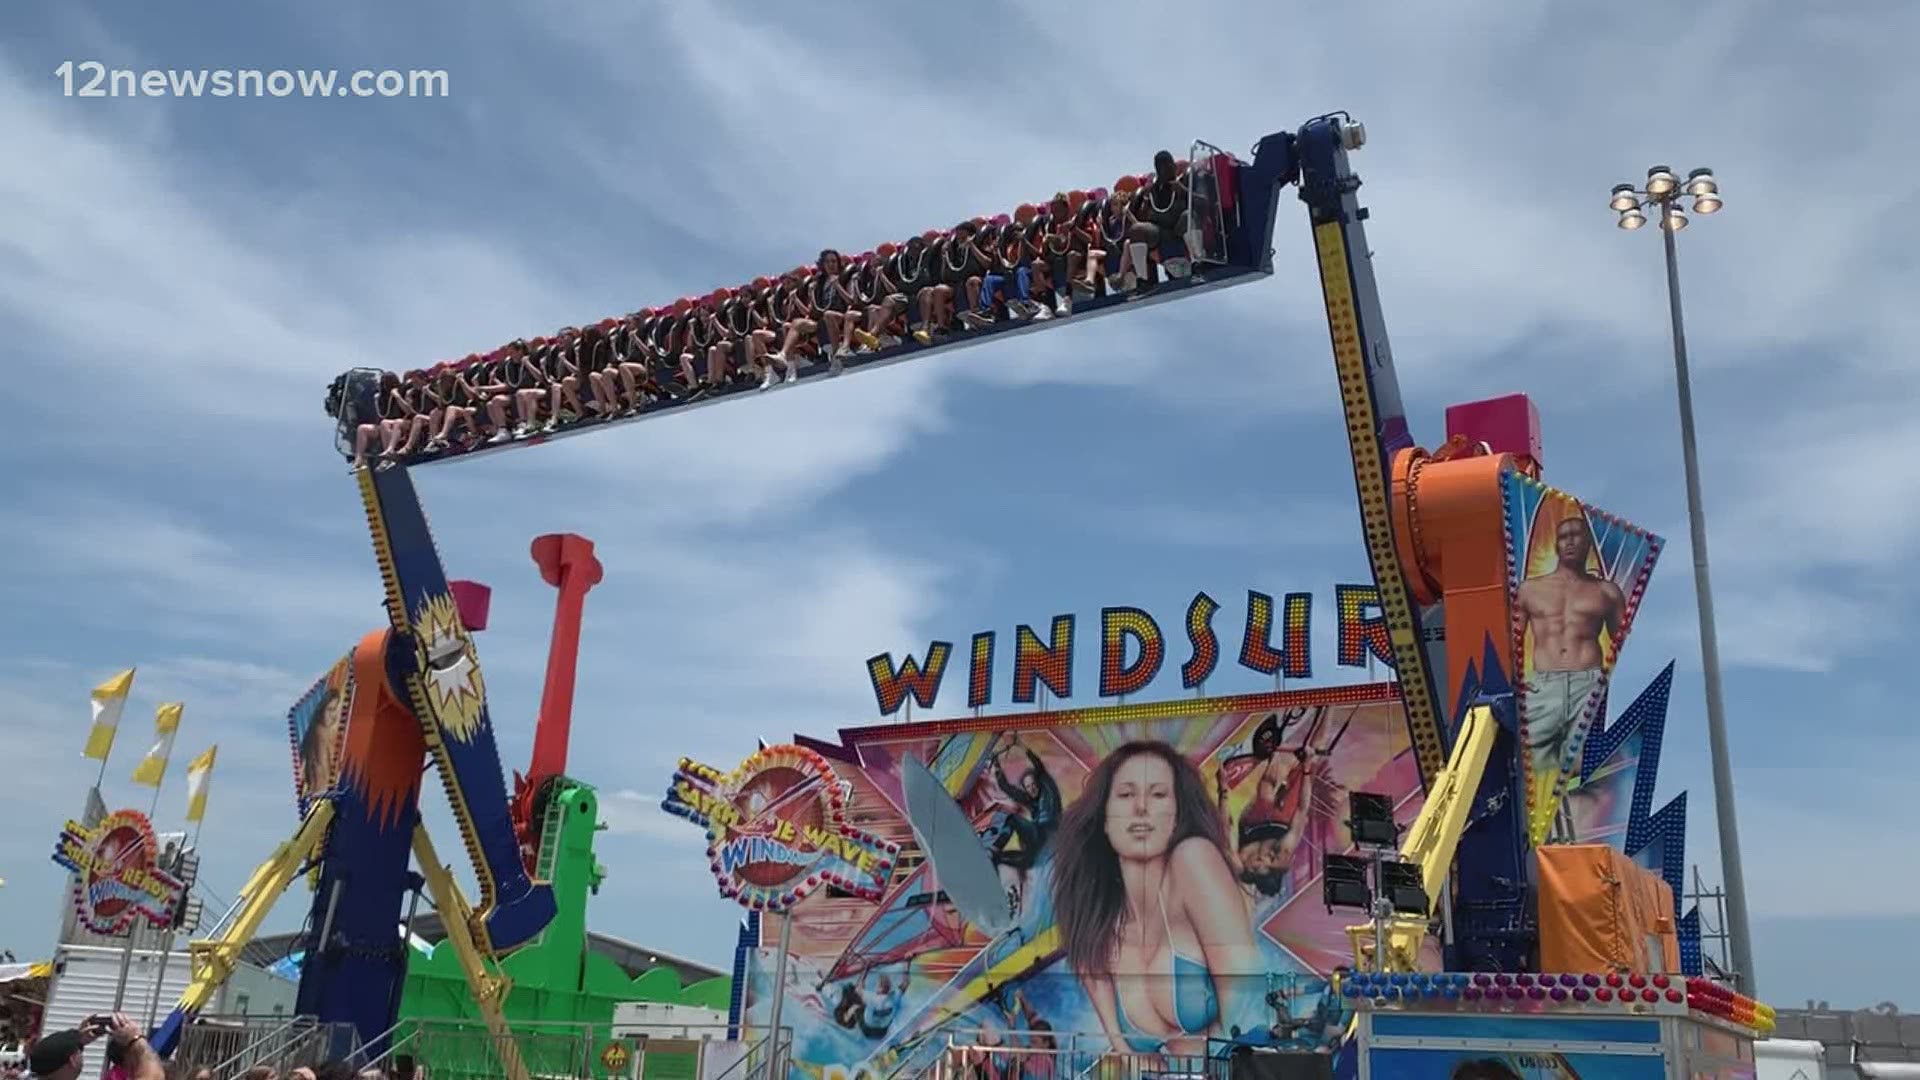 Sunday, May 31 was the last day of the Southeast Texas State Fair and organizers of the 10-day event say it, "surpassed their expectations."